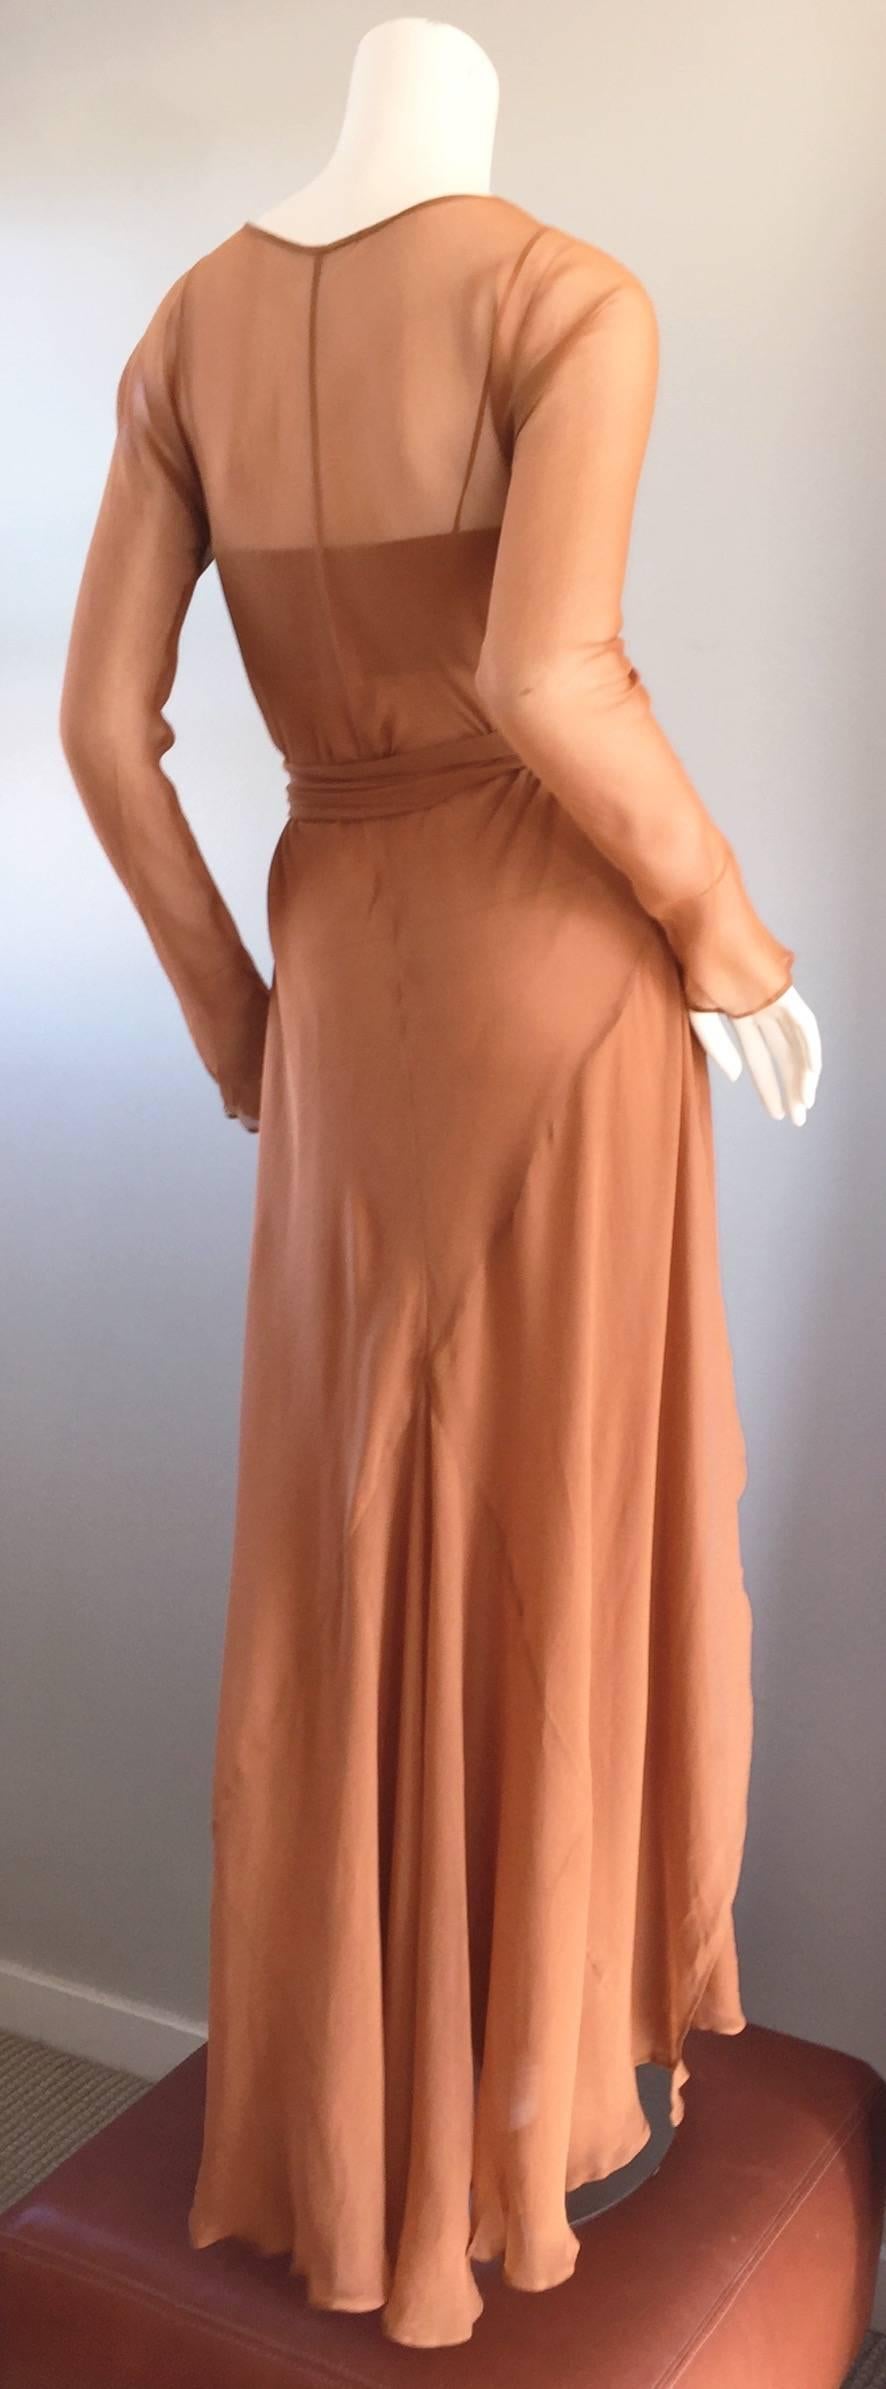 Stunning vintage ALBERTA FERRETTI silk chiffon dress ensemble! Grecian inspired, from the Terra-Cotta color, to the pleated bodice, to the layers and layers of paperweight thin chiffon skirt. Cardigan is also lightweight chiffon, wraps around the